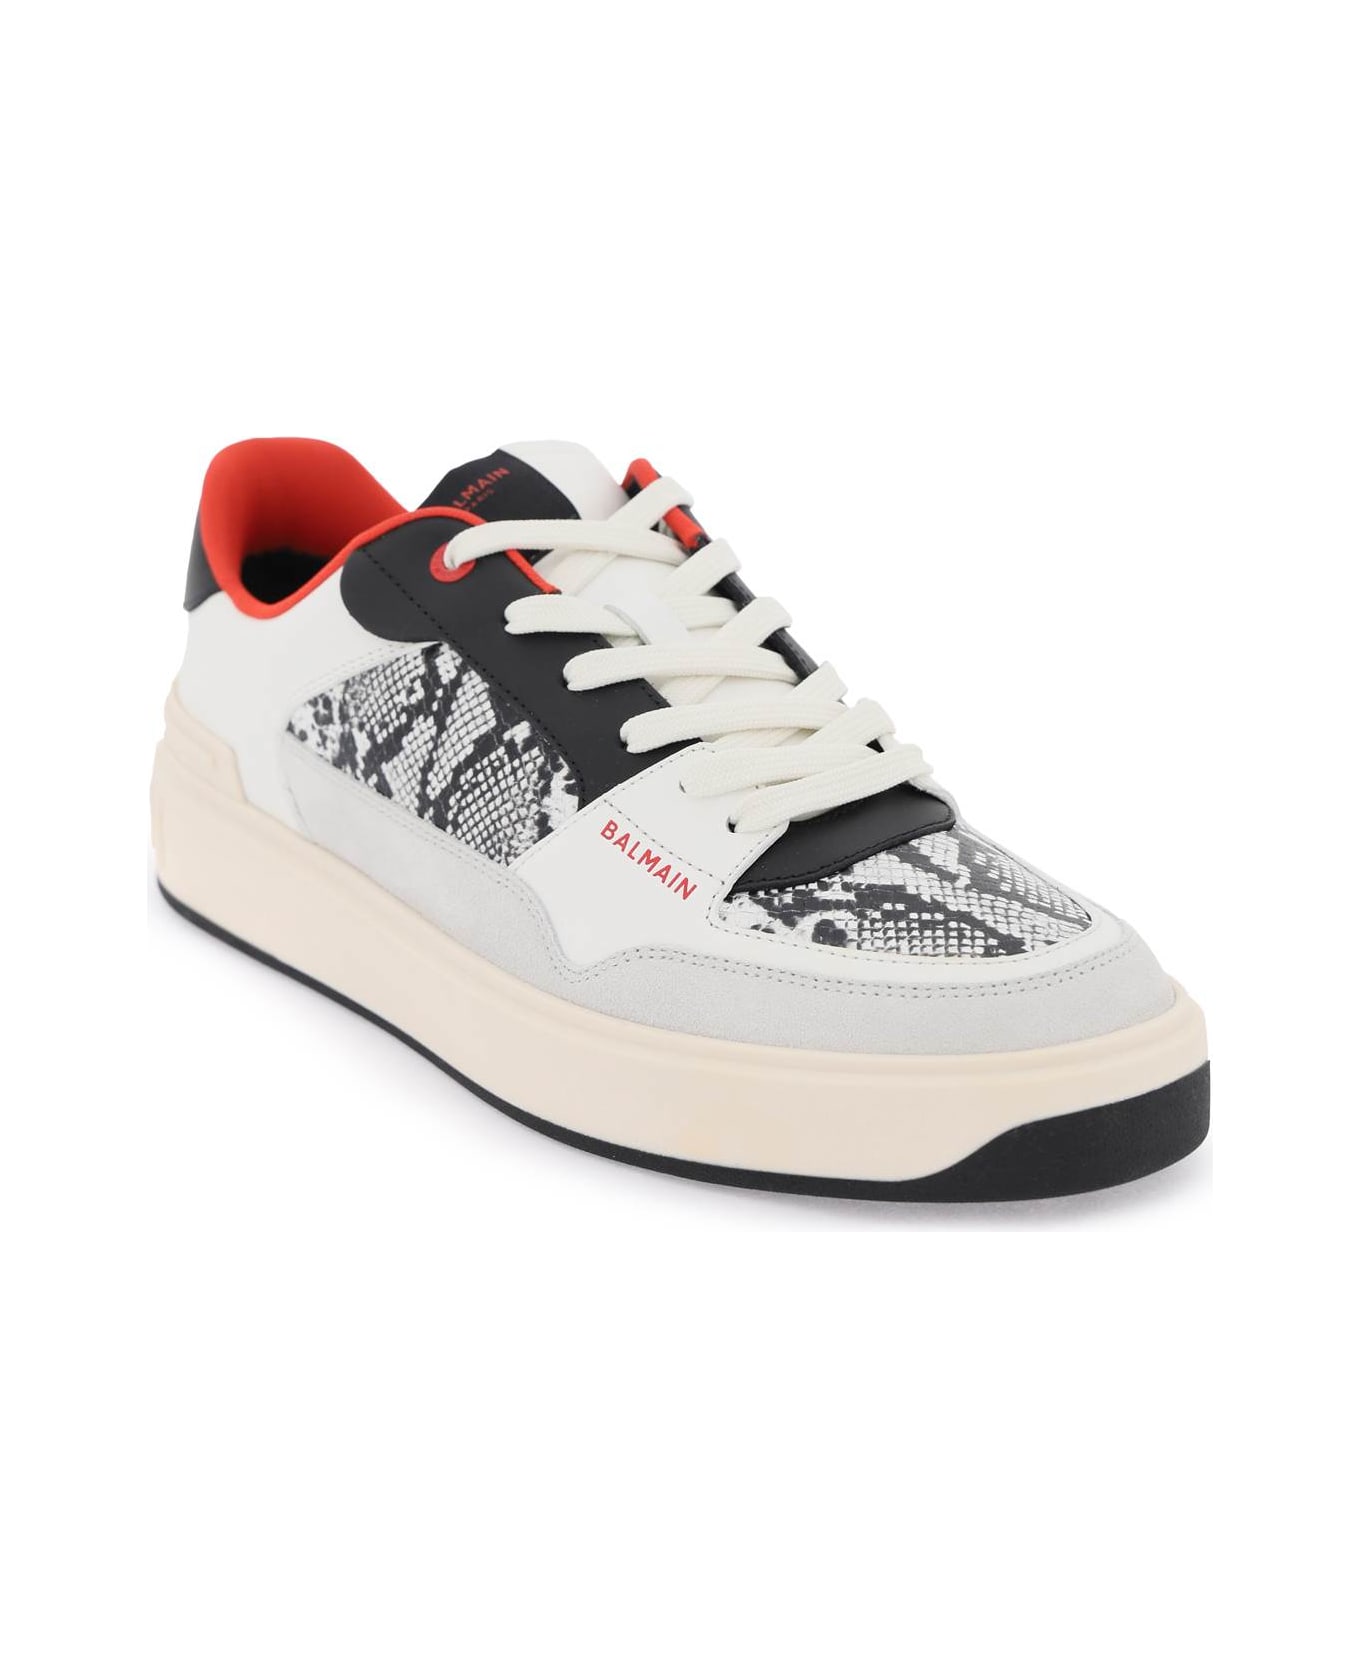 Balmain B-court Flip Sneakers In Python-effect Leather - GRIS ROUGE VIF (White) スニーカー